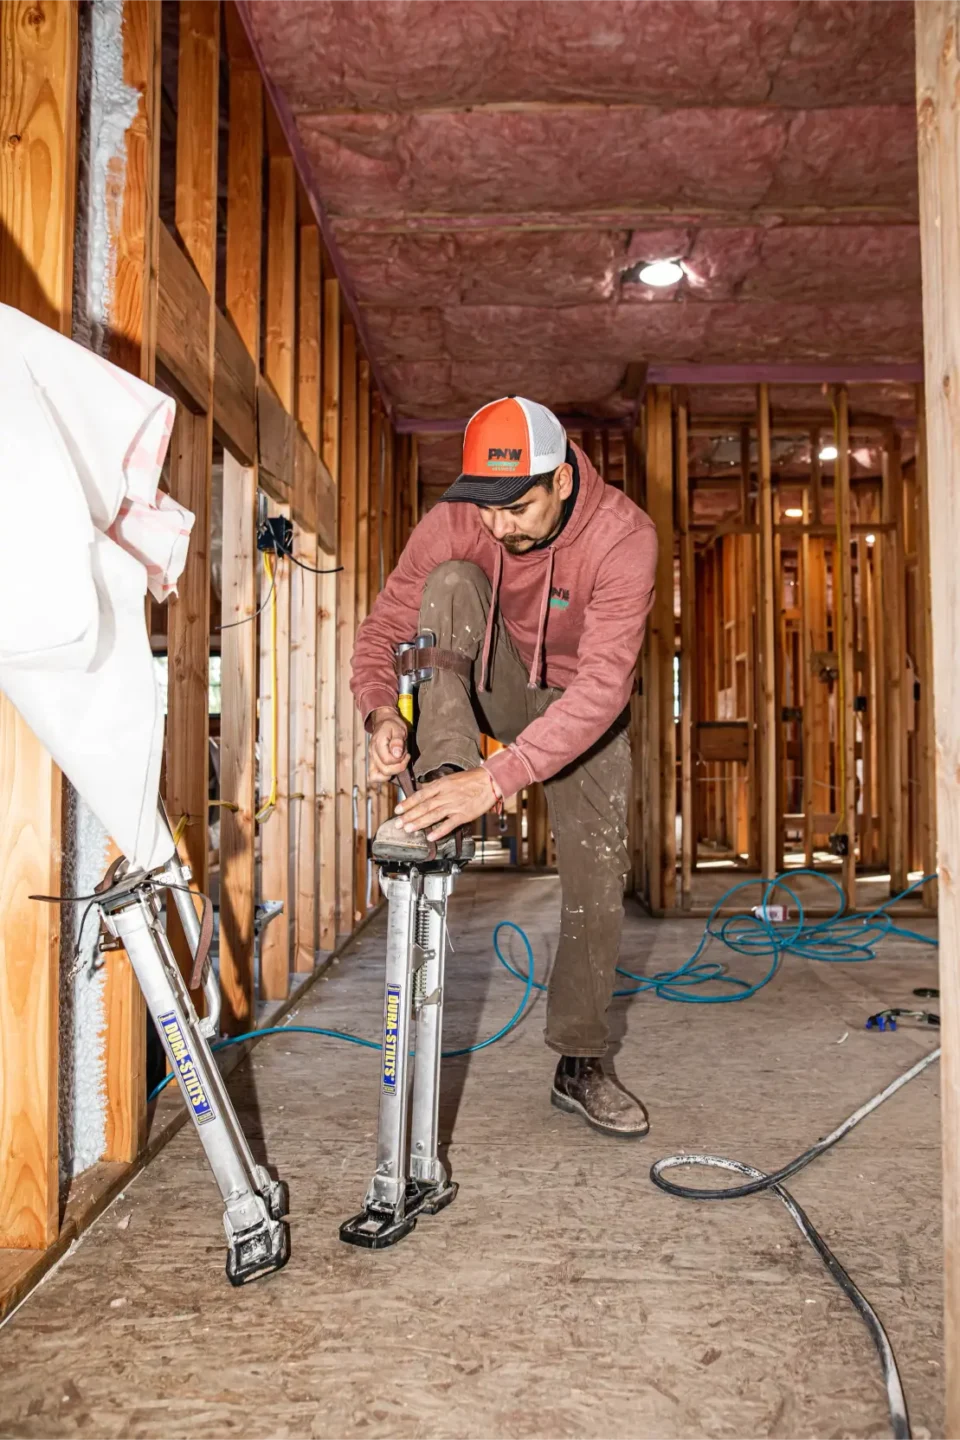 PNW Construction & Energy Services worker gettiong ready to install insulation in the beams while on stilts.